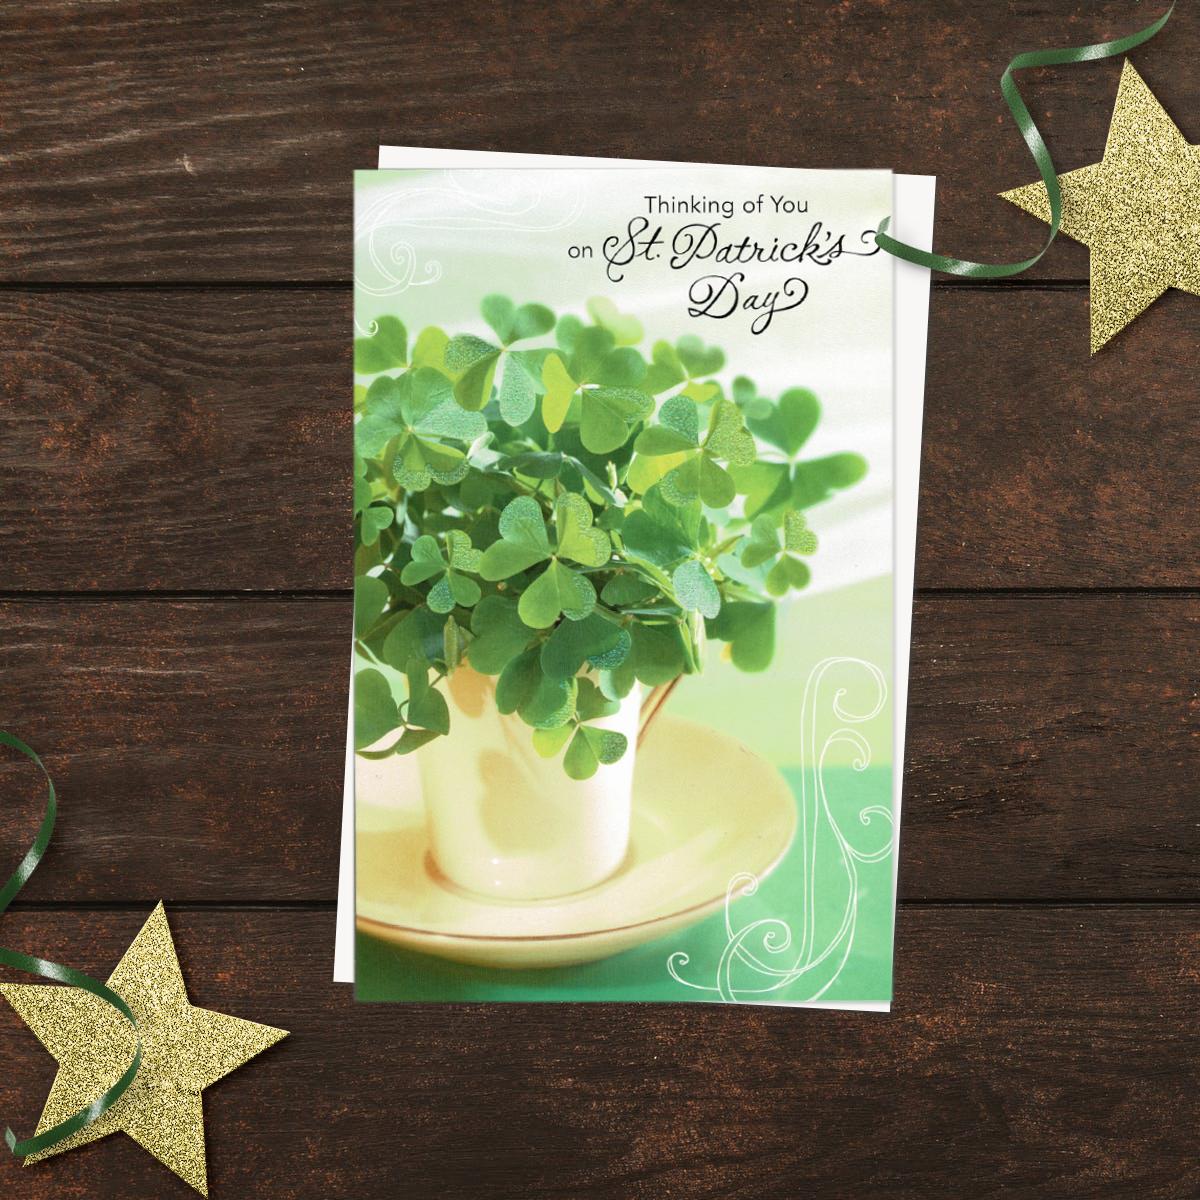 ' Thinking Of You On St. Patrick's Day' Card Featuring A Cup And saucer Filled With clover. With Added Sparkle And White Envelope